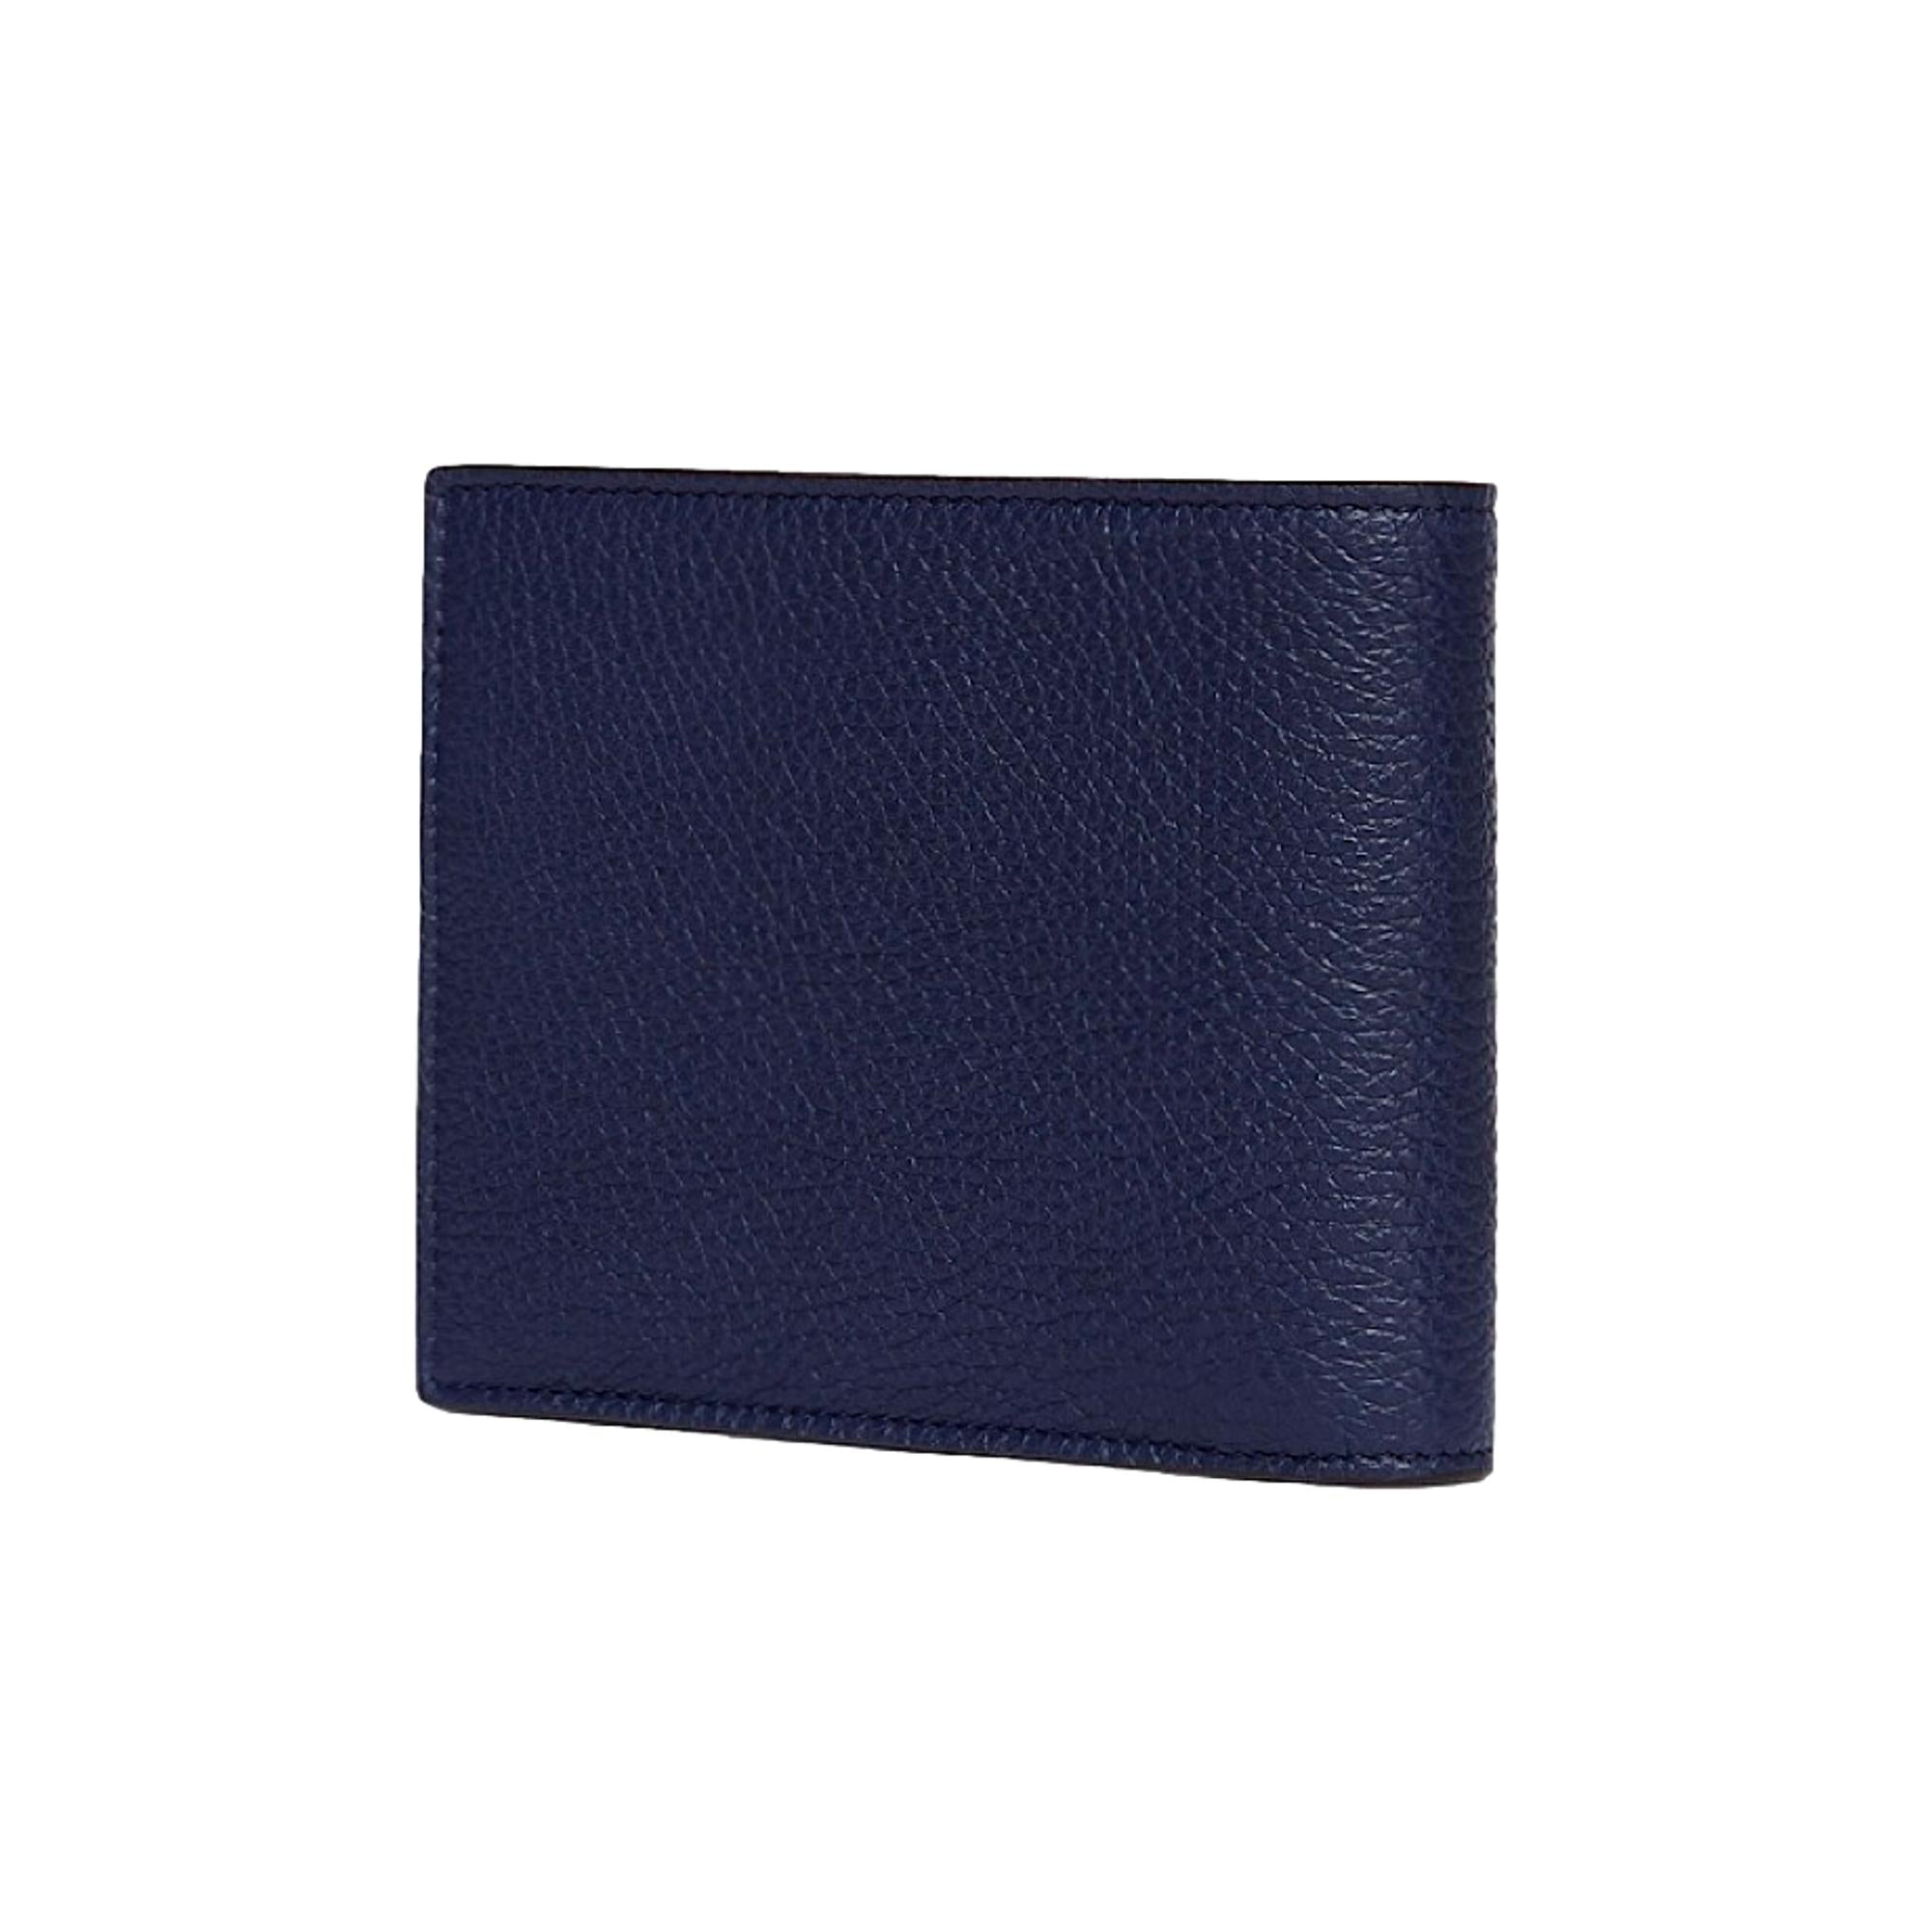 Fendi Baguette Blue Grey Pebbled Leather Billfold Wallet 7M0001 at_Queen_Bee_of_Beverly_Hills